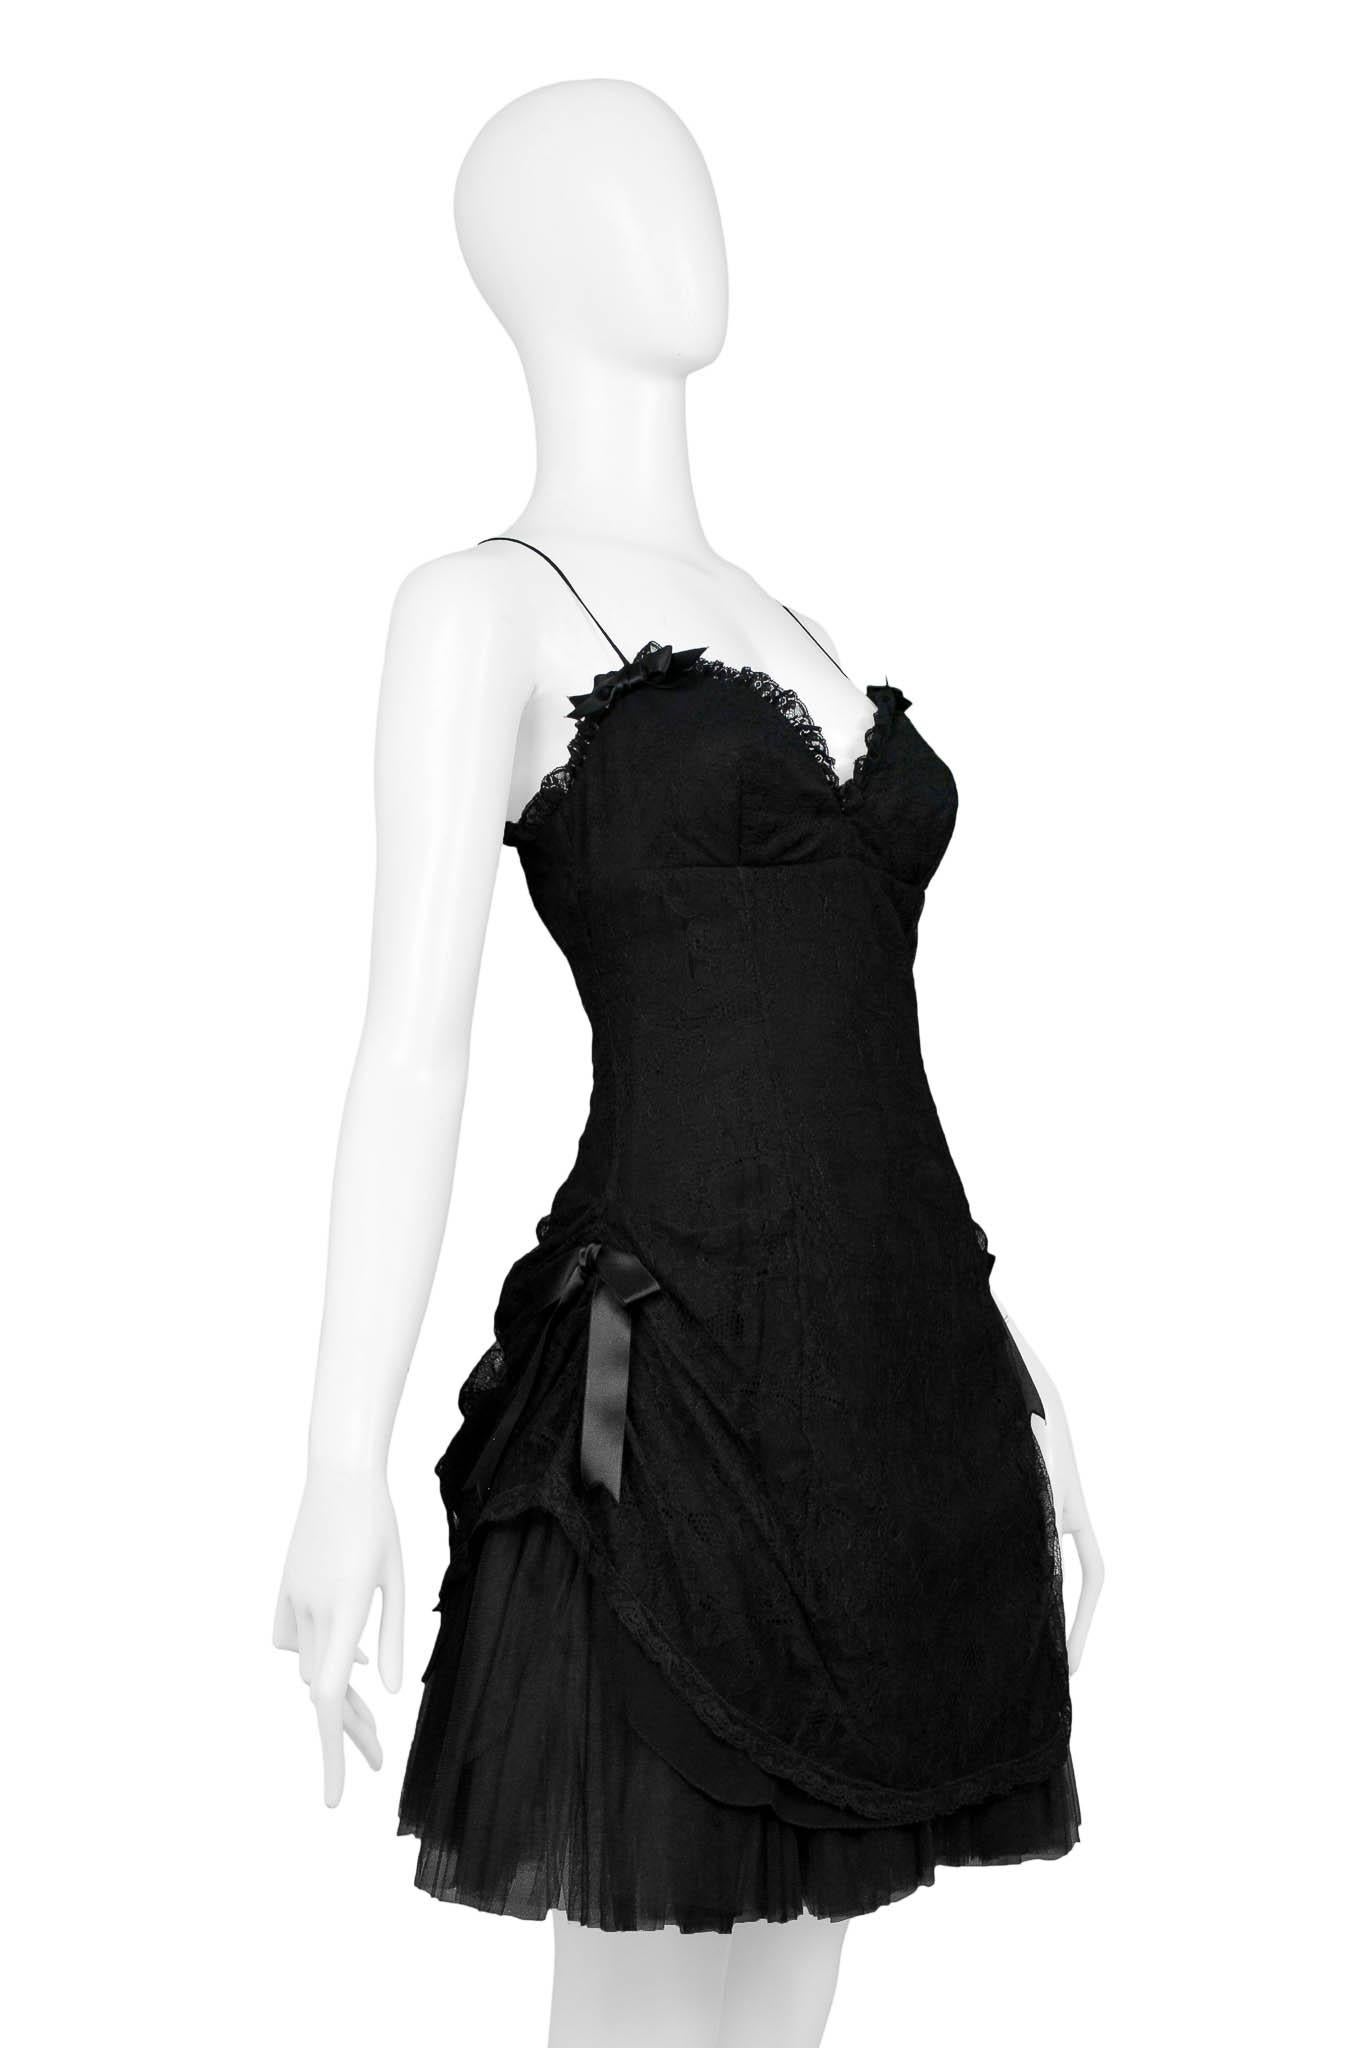 Anna Molinari Black Lace Party Dress In Excellent Condition For Sale In Los Angeles, CA